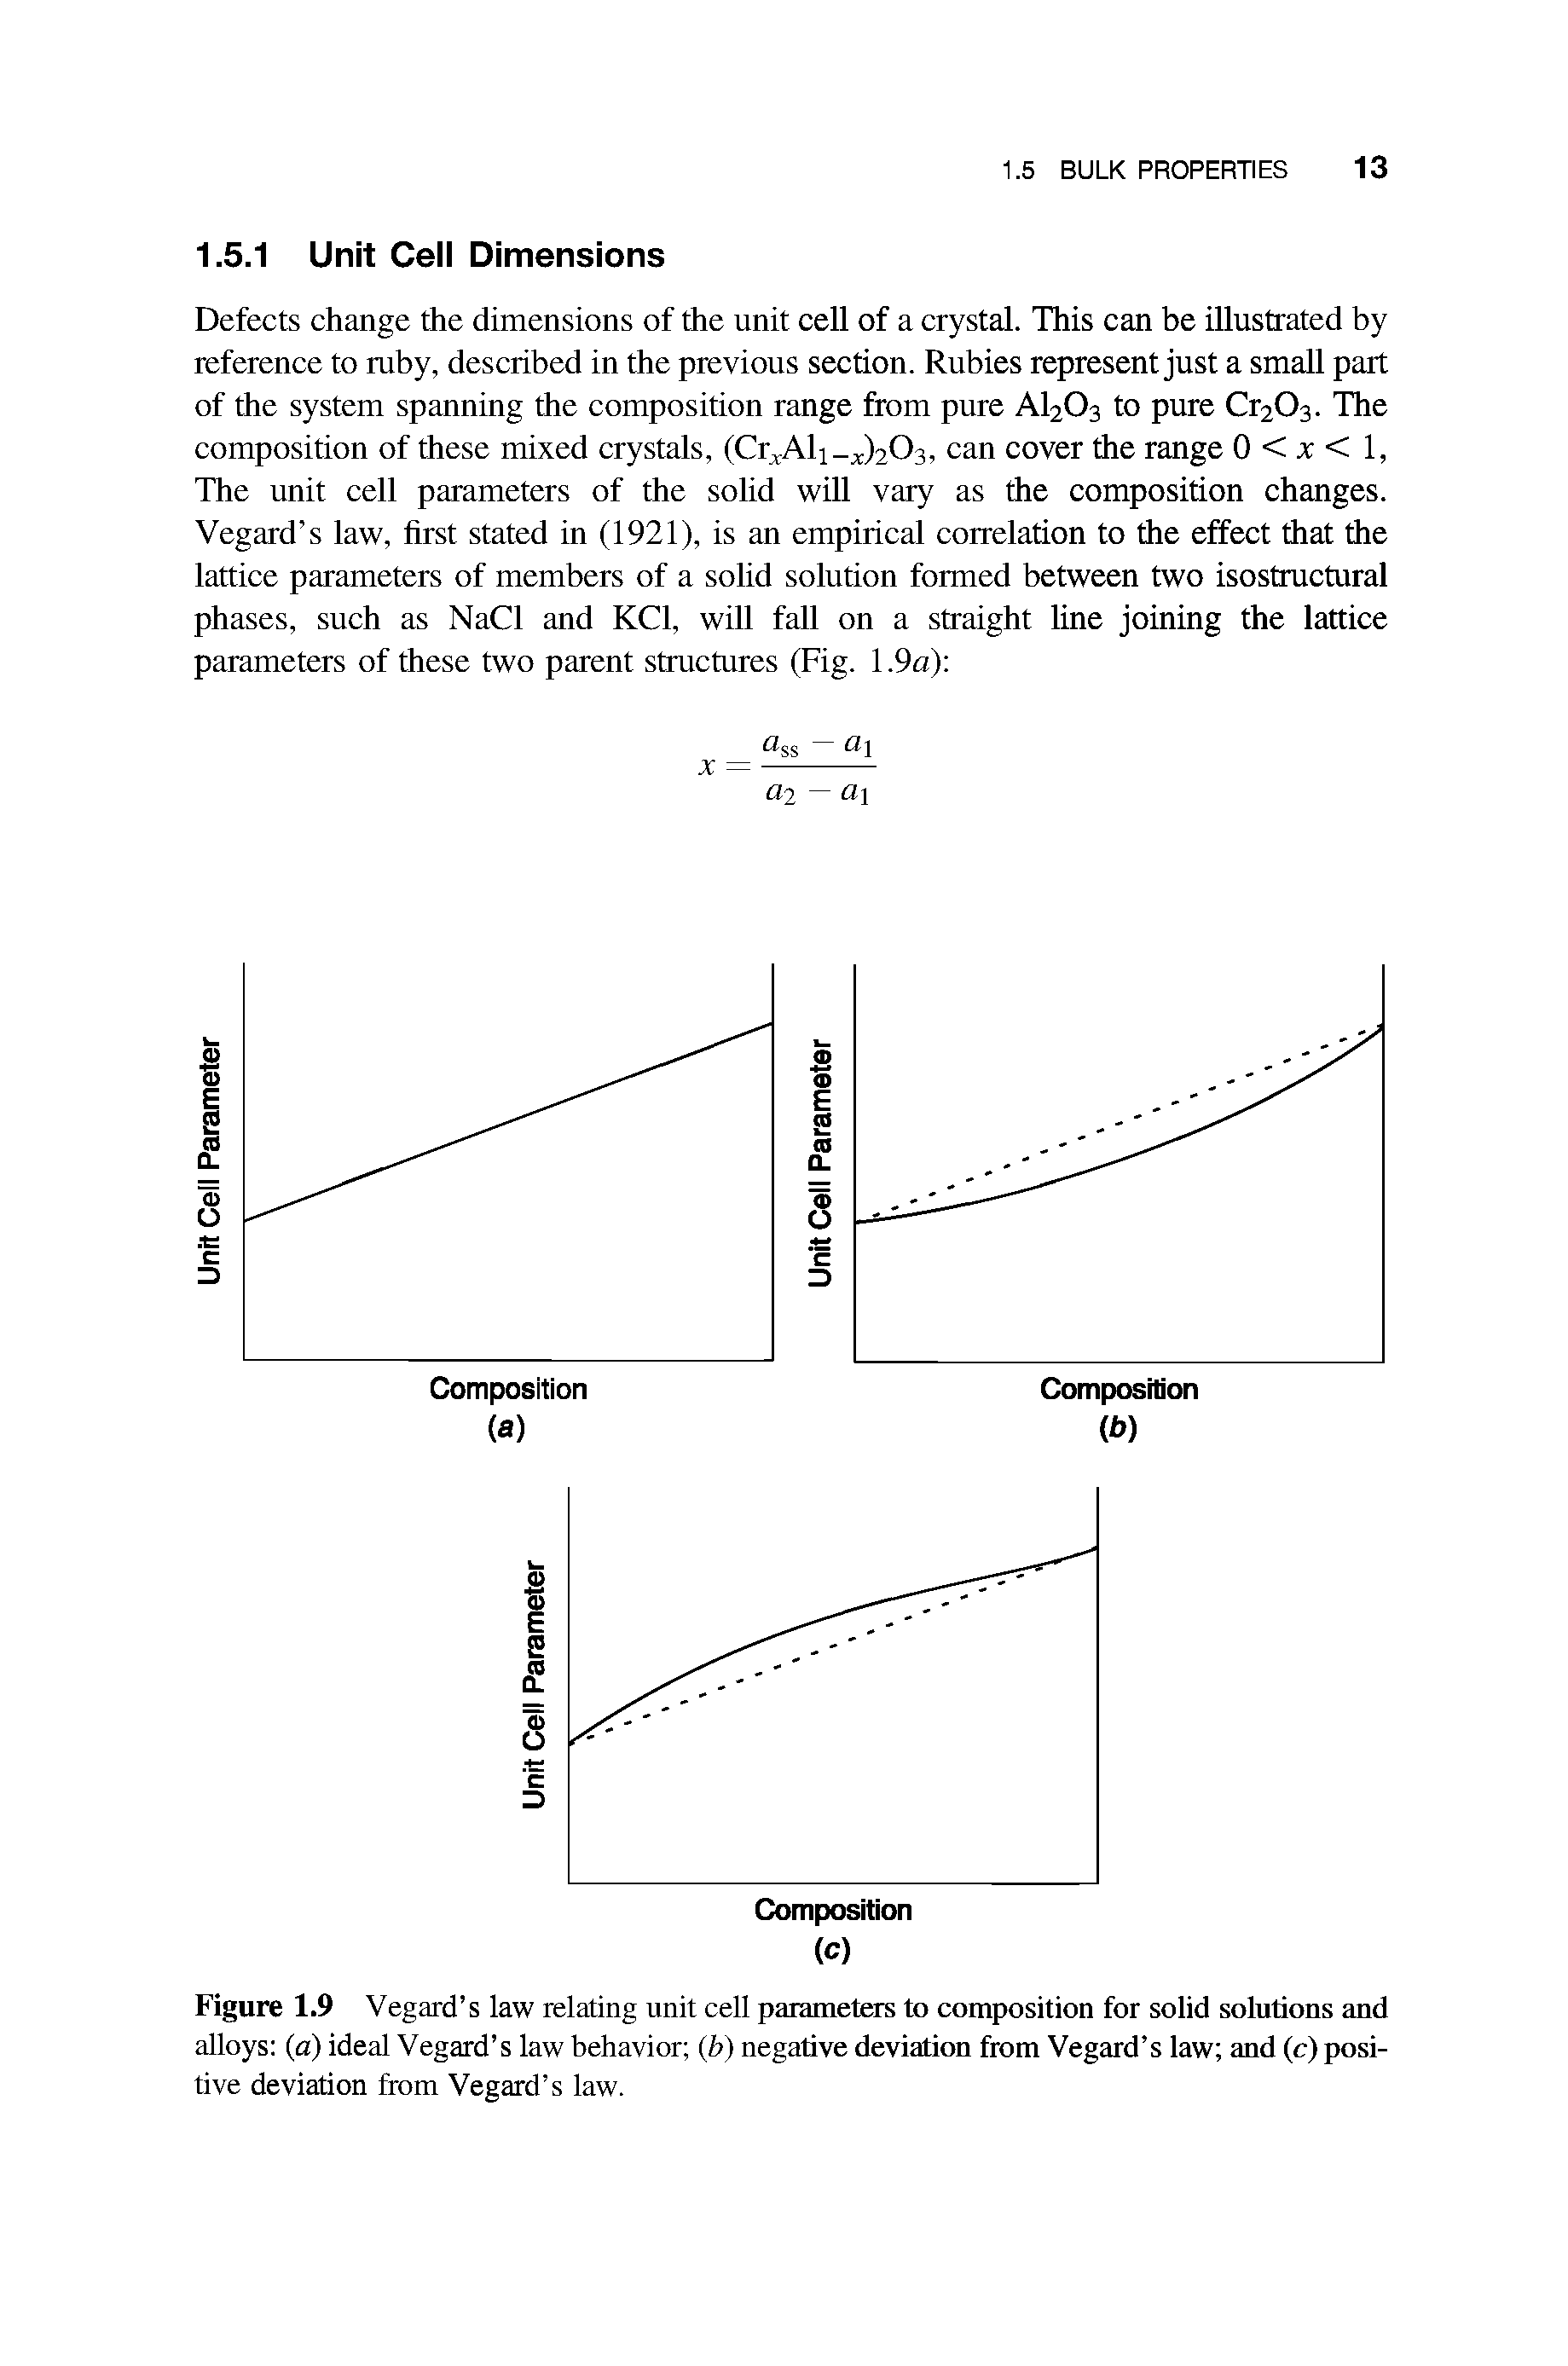 Figure 1.9 Vegard s law relating unit cell parameters to composition for solid solutions and alloys (a) ideal Vegard s law behavior (b) negative deviation from Vegard s law and (c) positive deviation from Vegard s law.